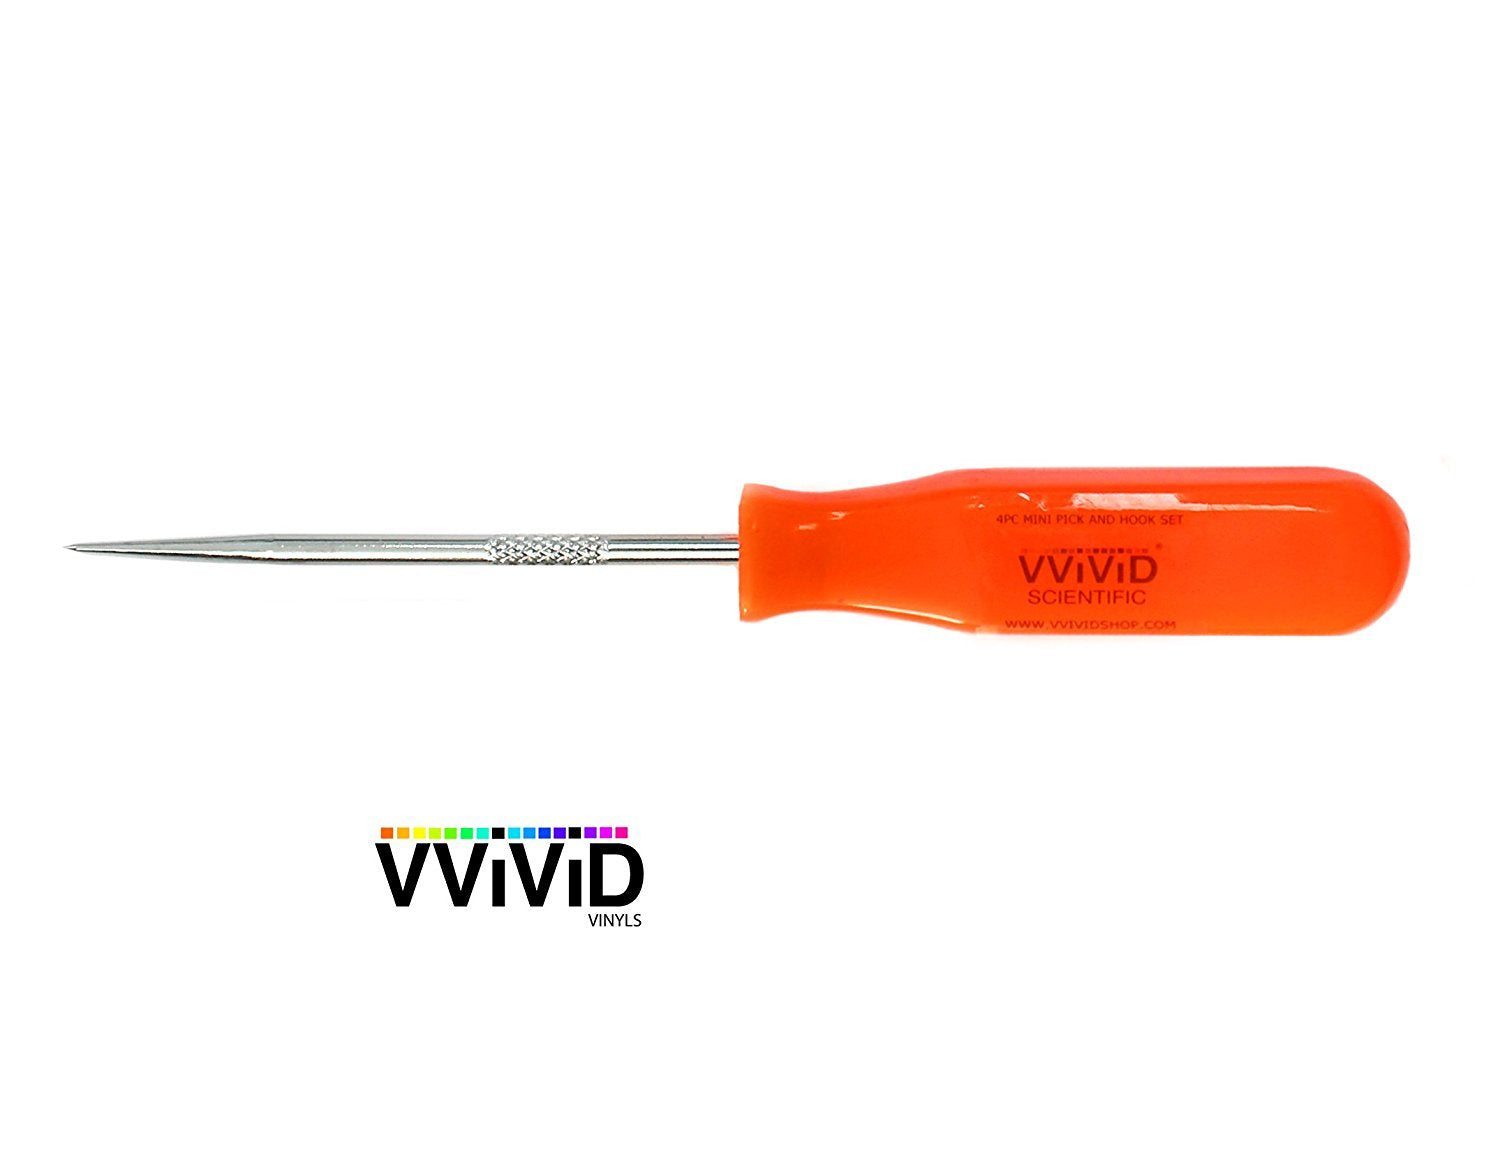 VViViD Stainless Steel Precision Craft Vinyl Weeding Tools - 1 piece (straight point)